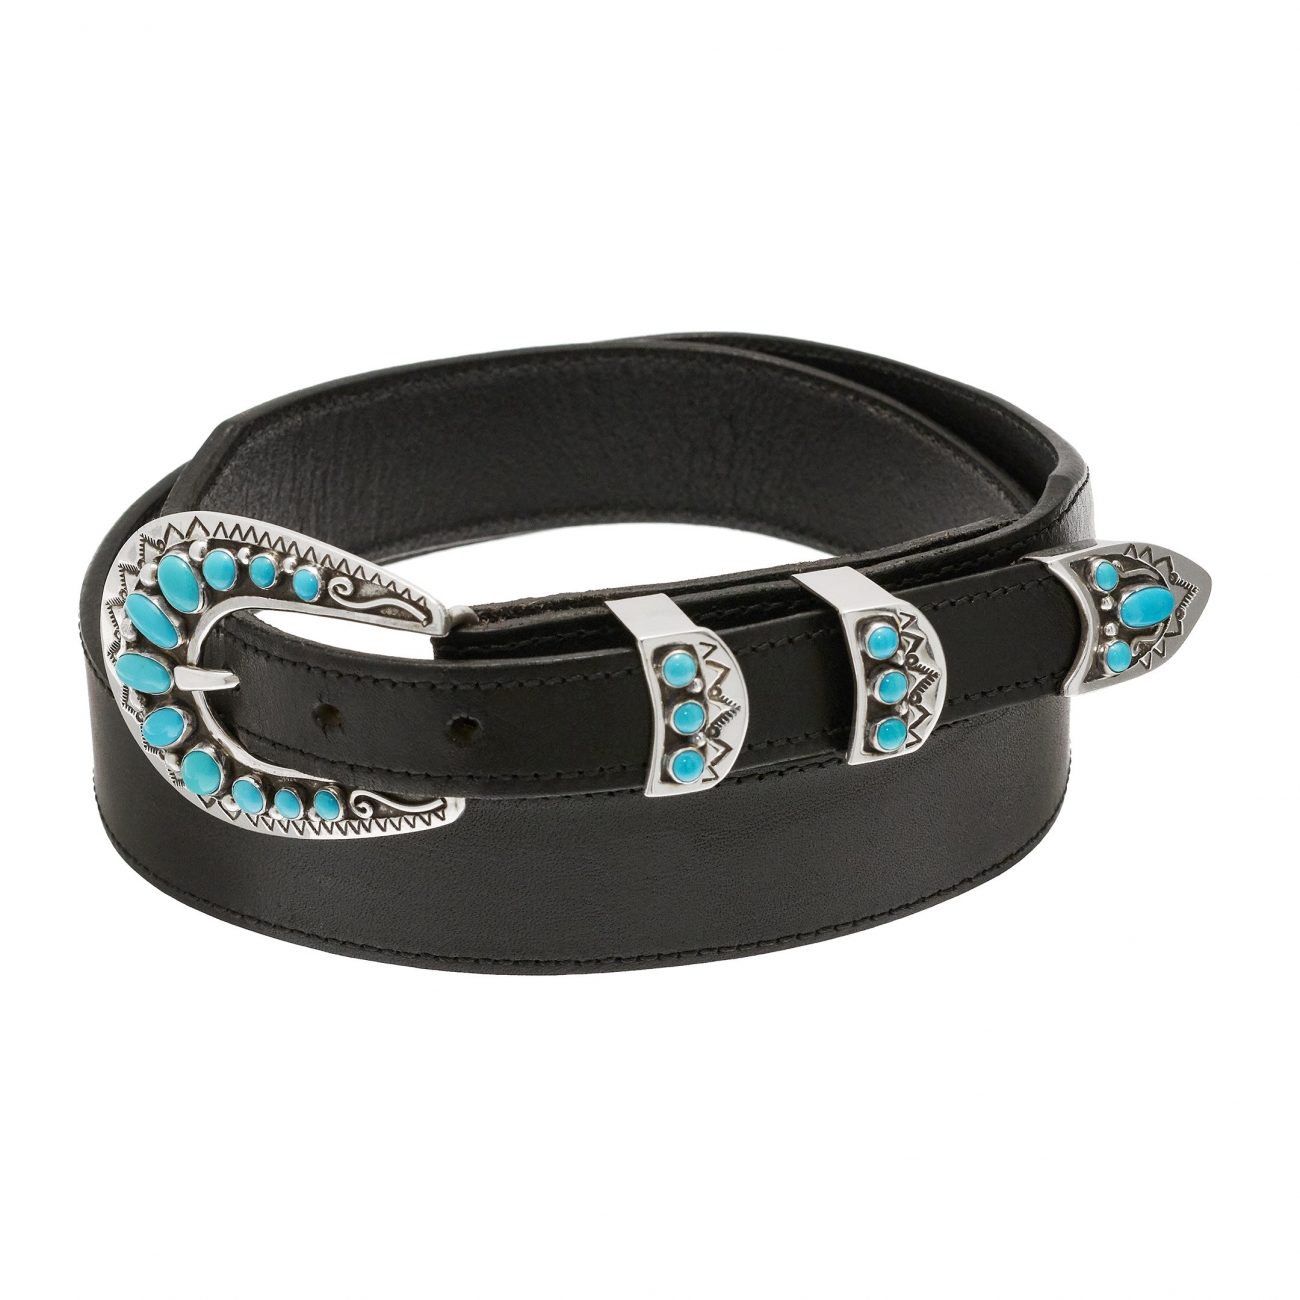 Harpo Paris ranger belt buckle BK52 in turquoise and silver